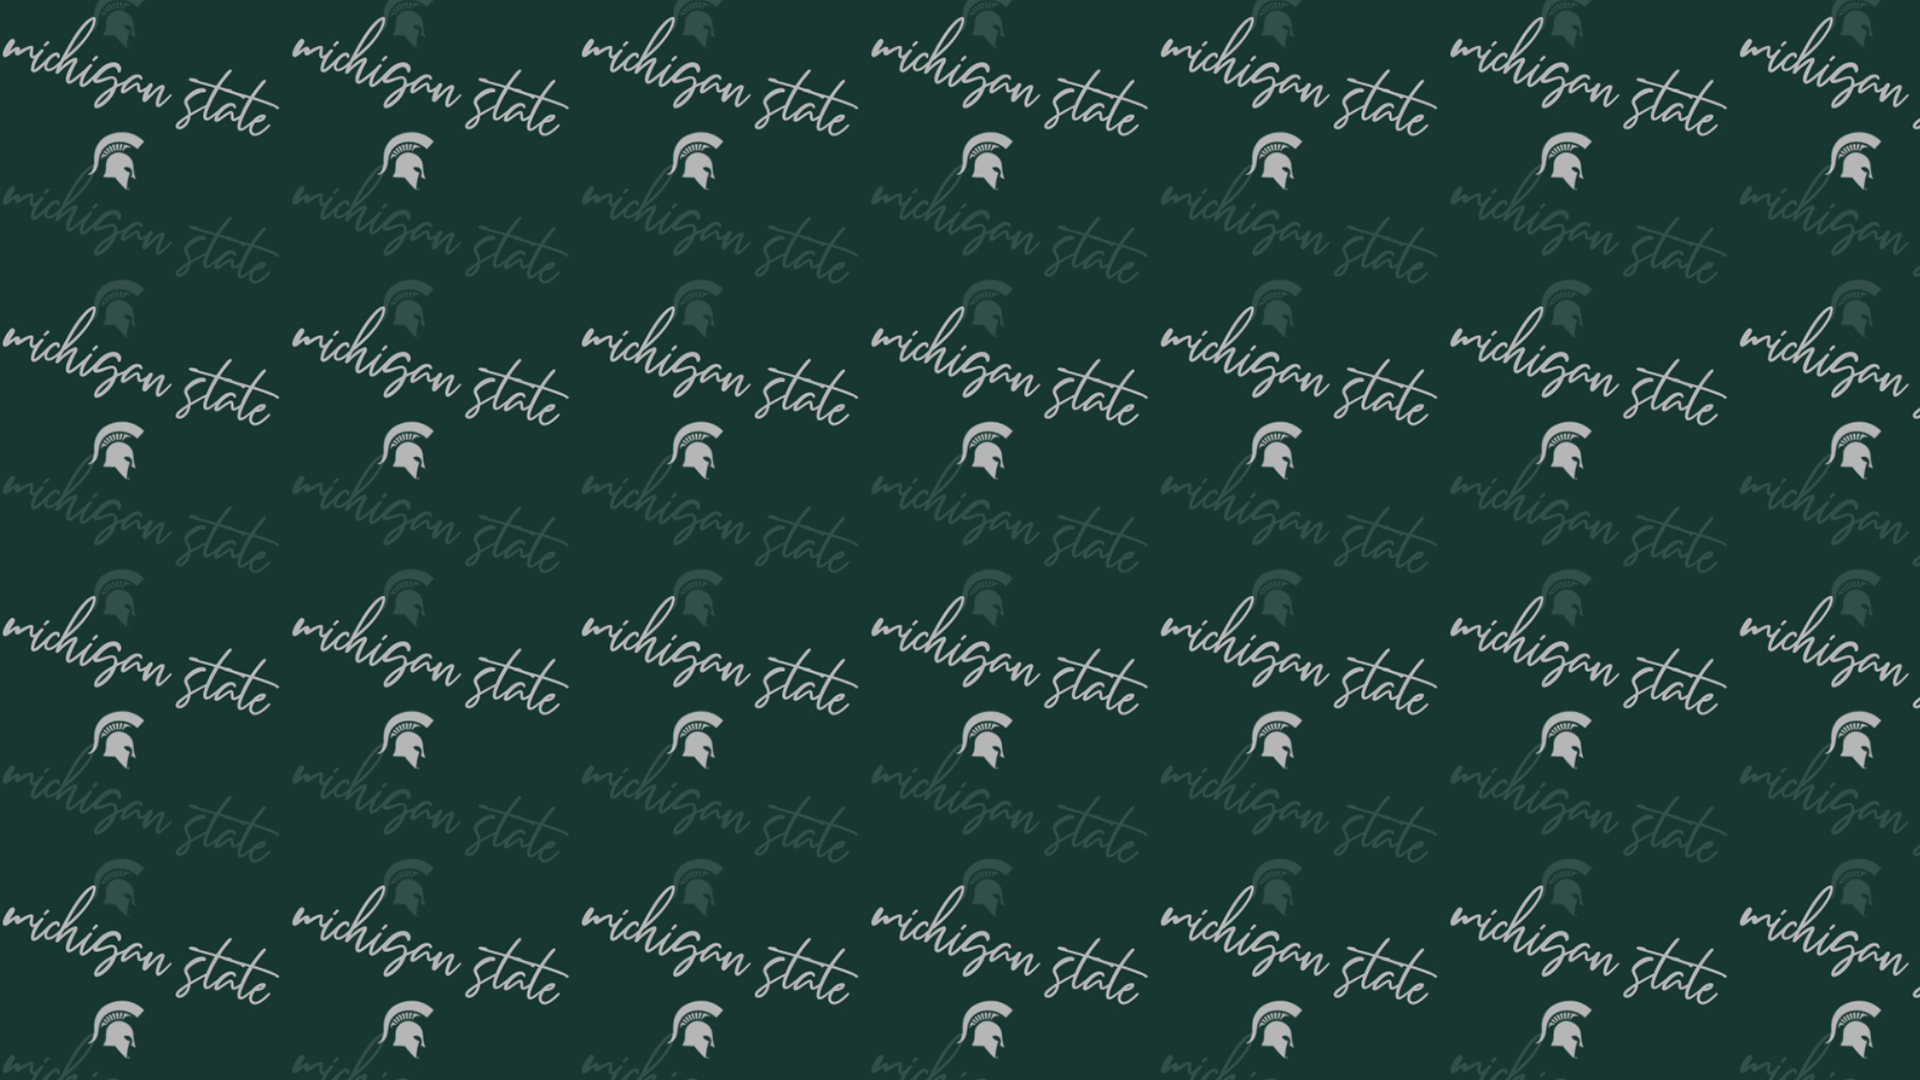 Download wallpapers michigan state spartans logo for desktop free High  Quality HD pictures wallpapers  Page 1